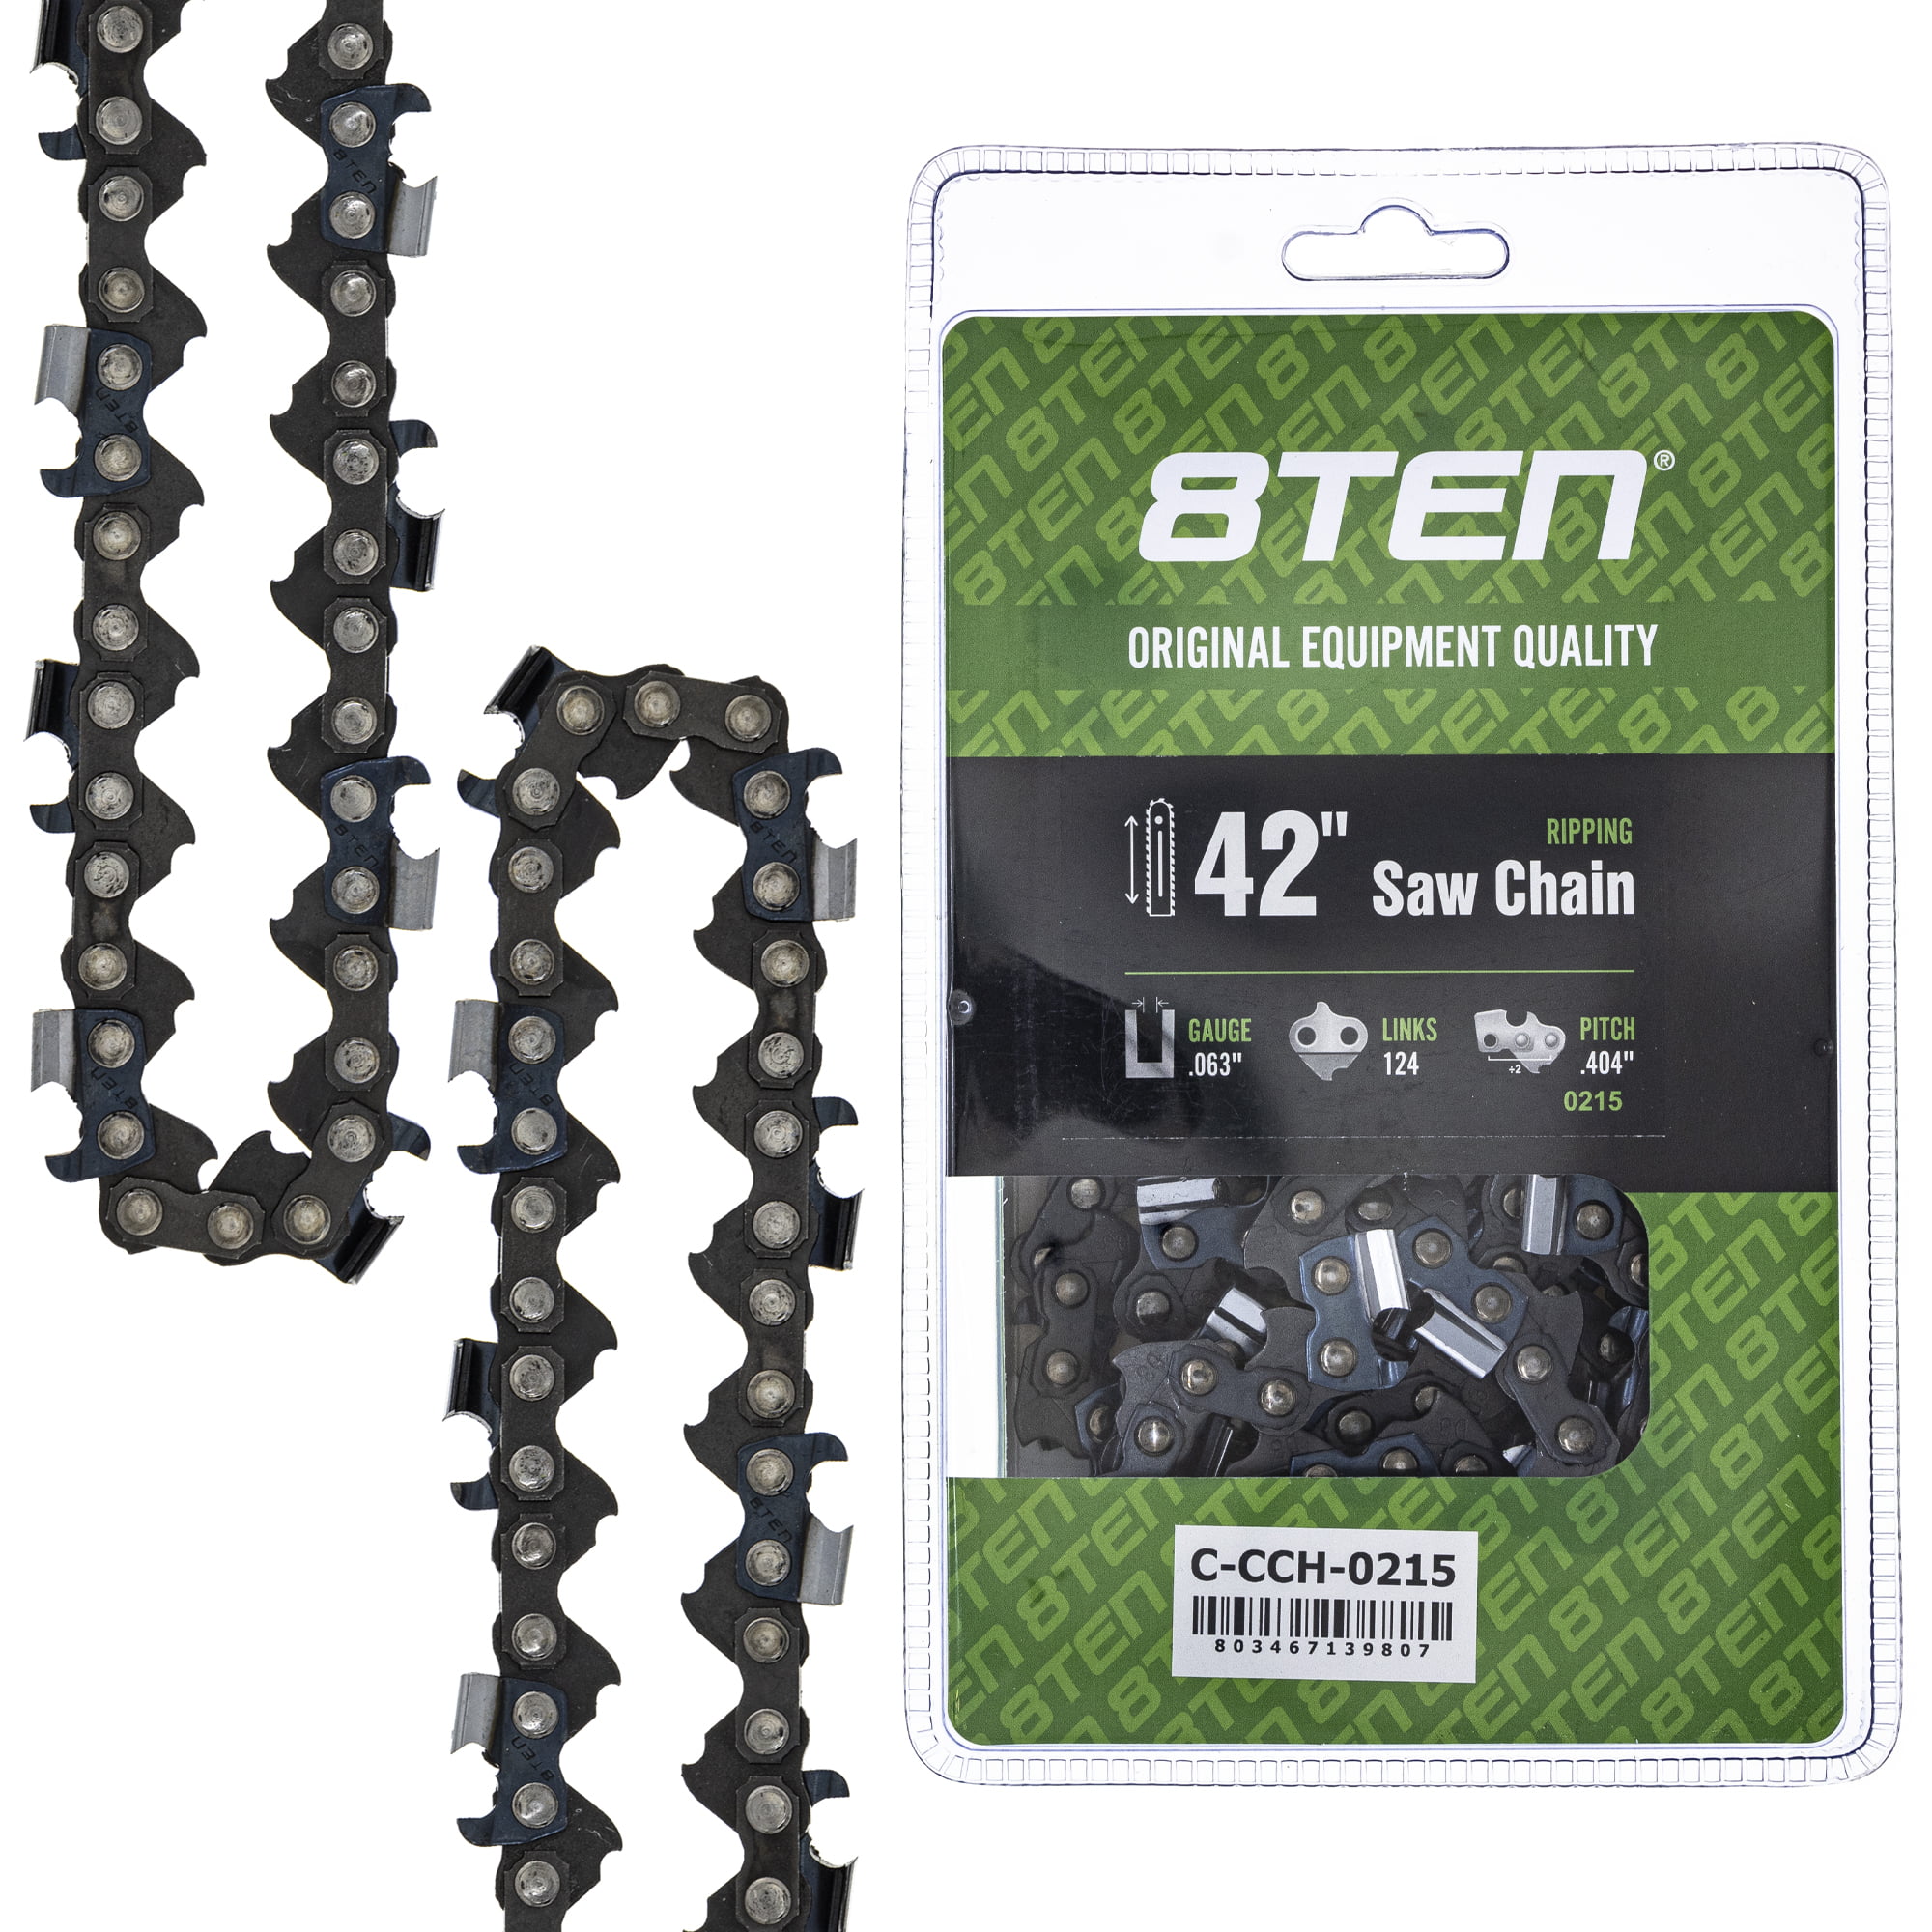 2-Pack 20" Full Chisel Chainsaw Chain for Echo cs 510 501-3/8" .050" 70 DL